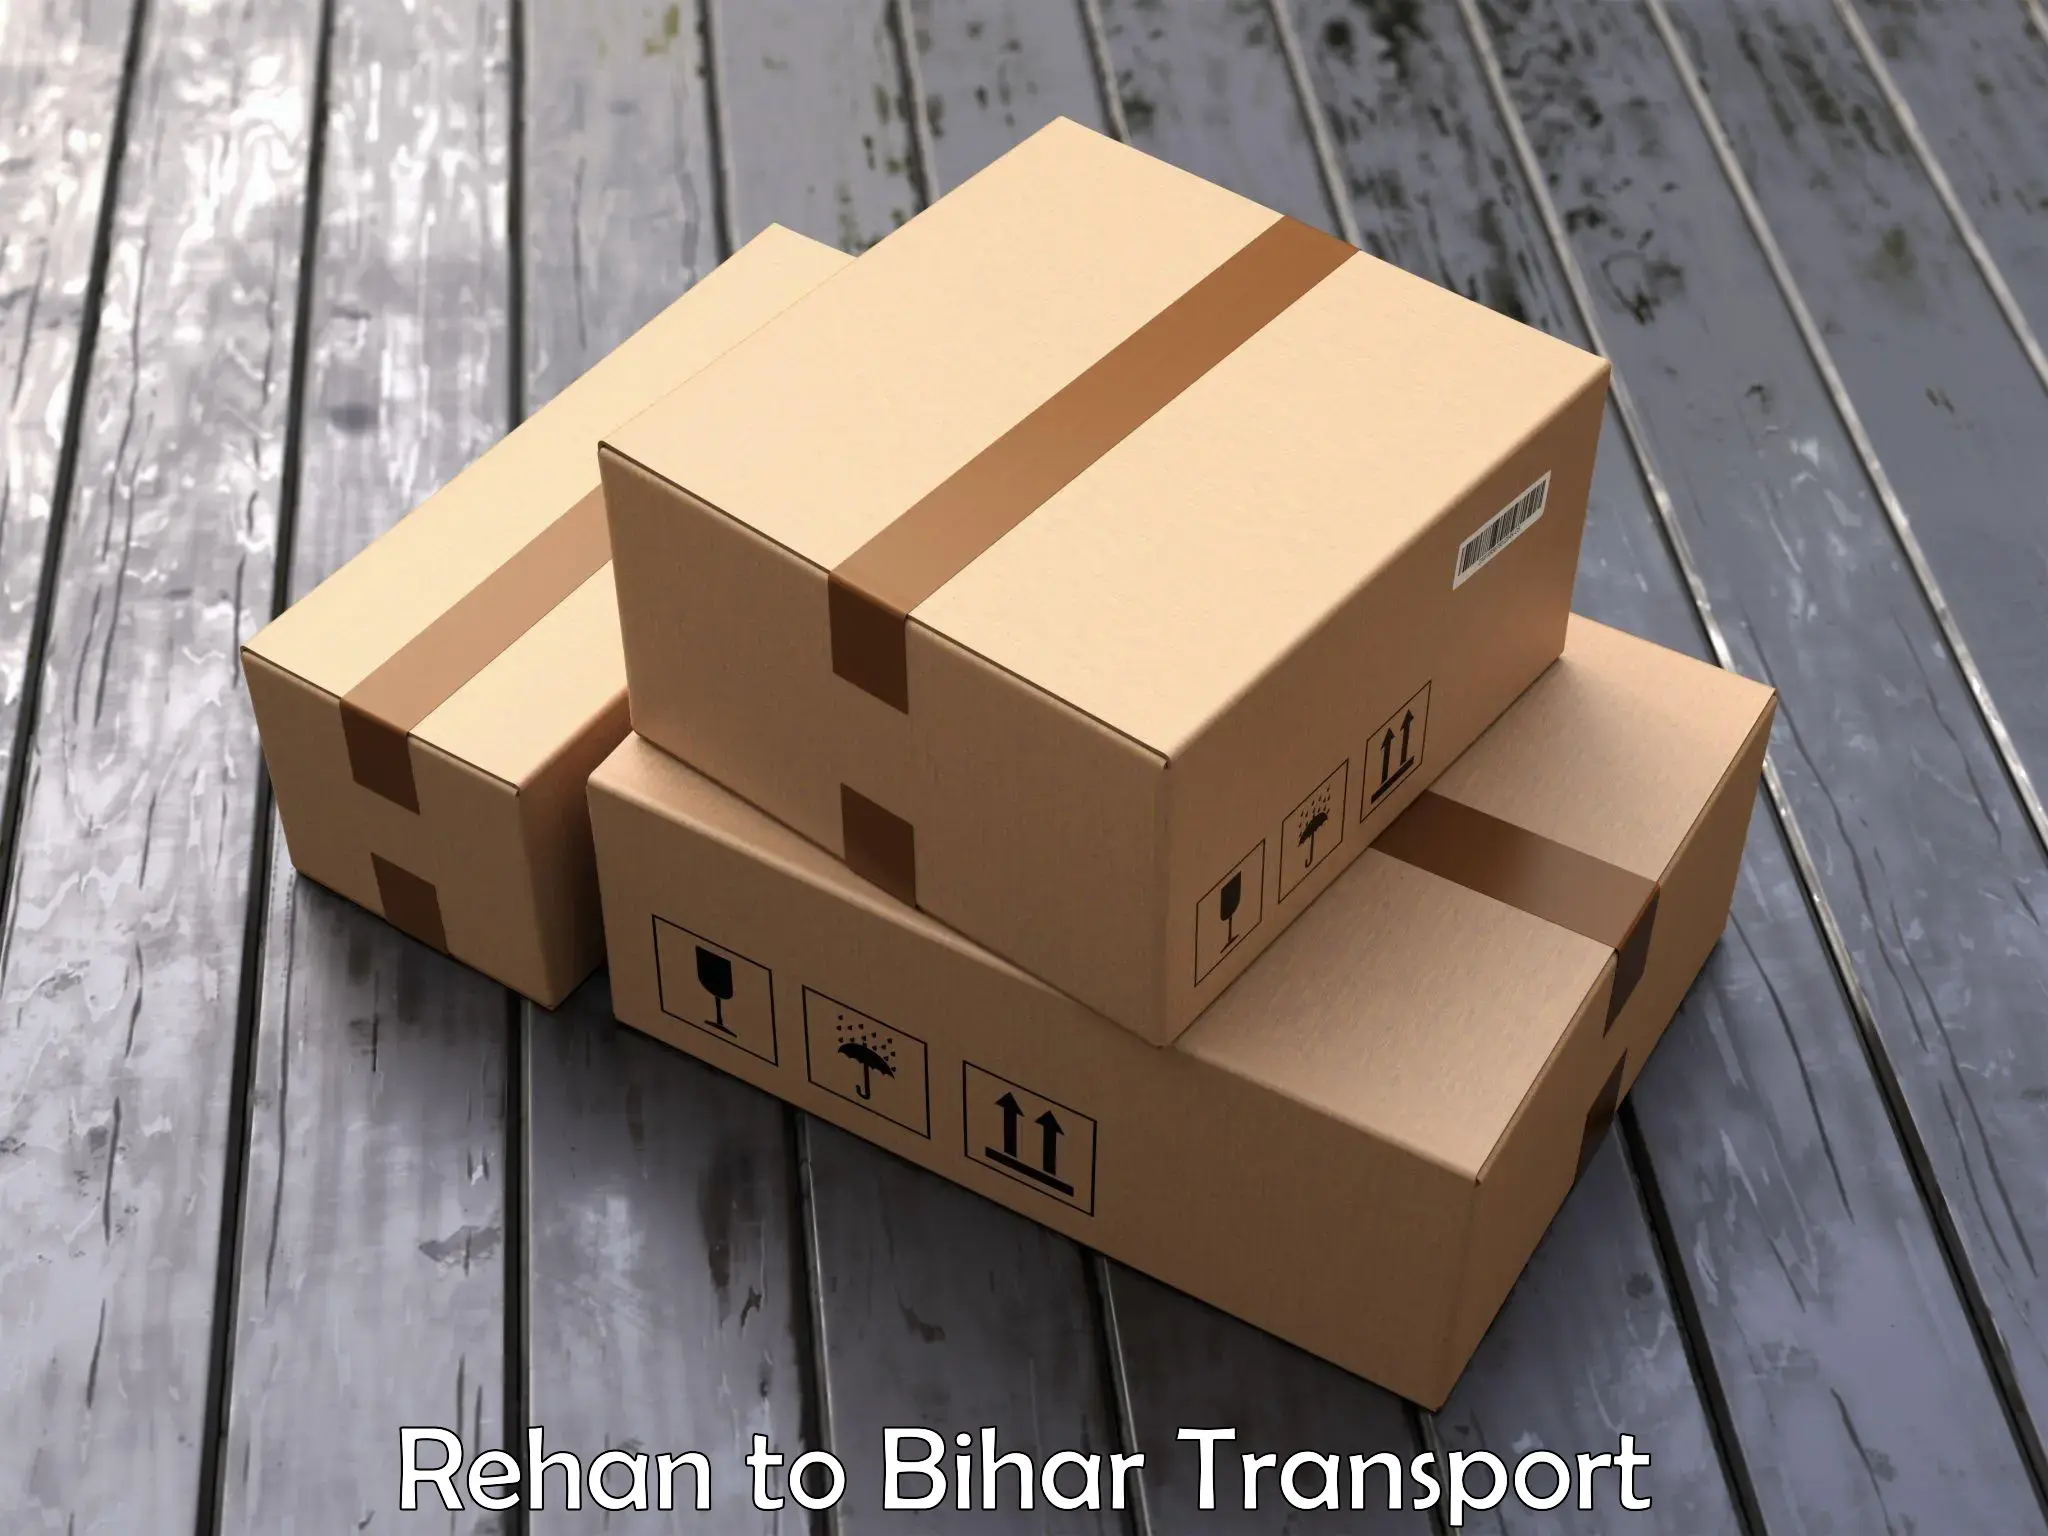 Container transport service Rehan to Bihar